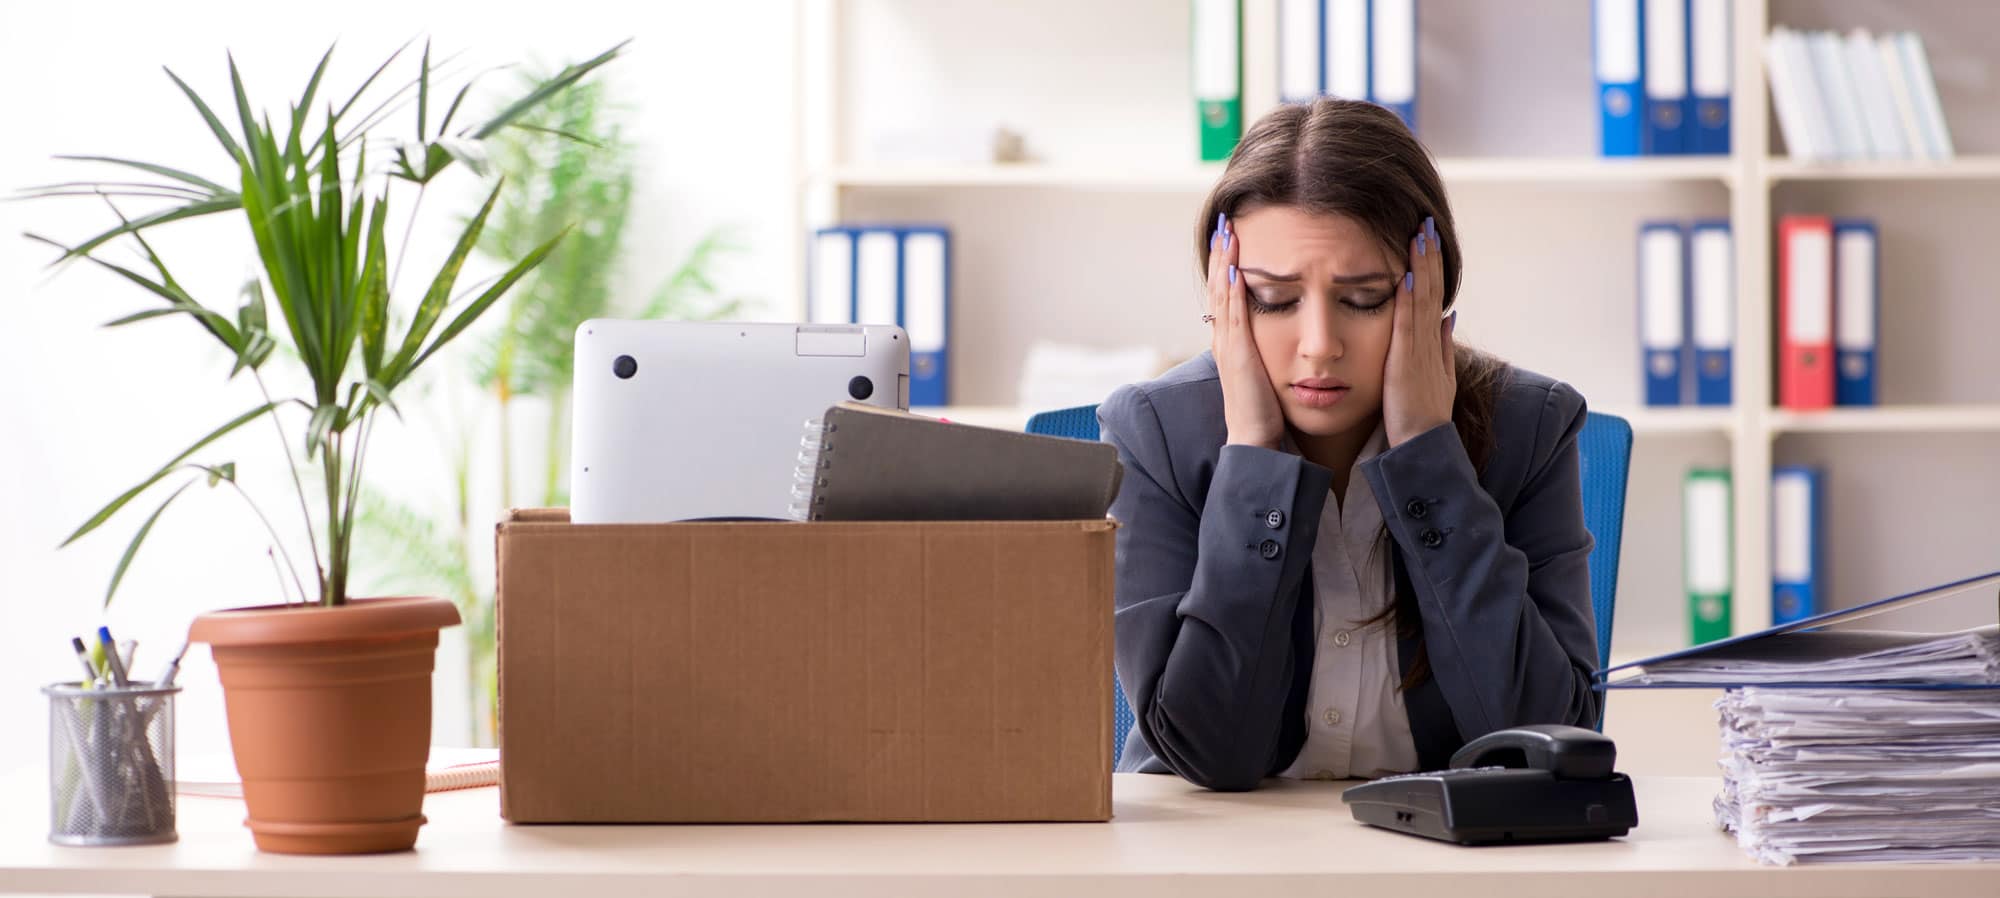 Employee Relocation Pitfalls: What Employers Should Avoid